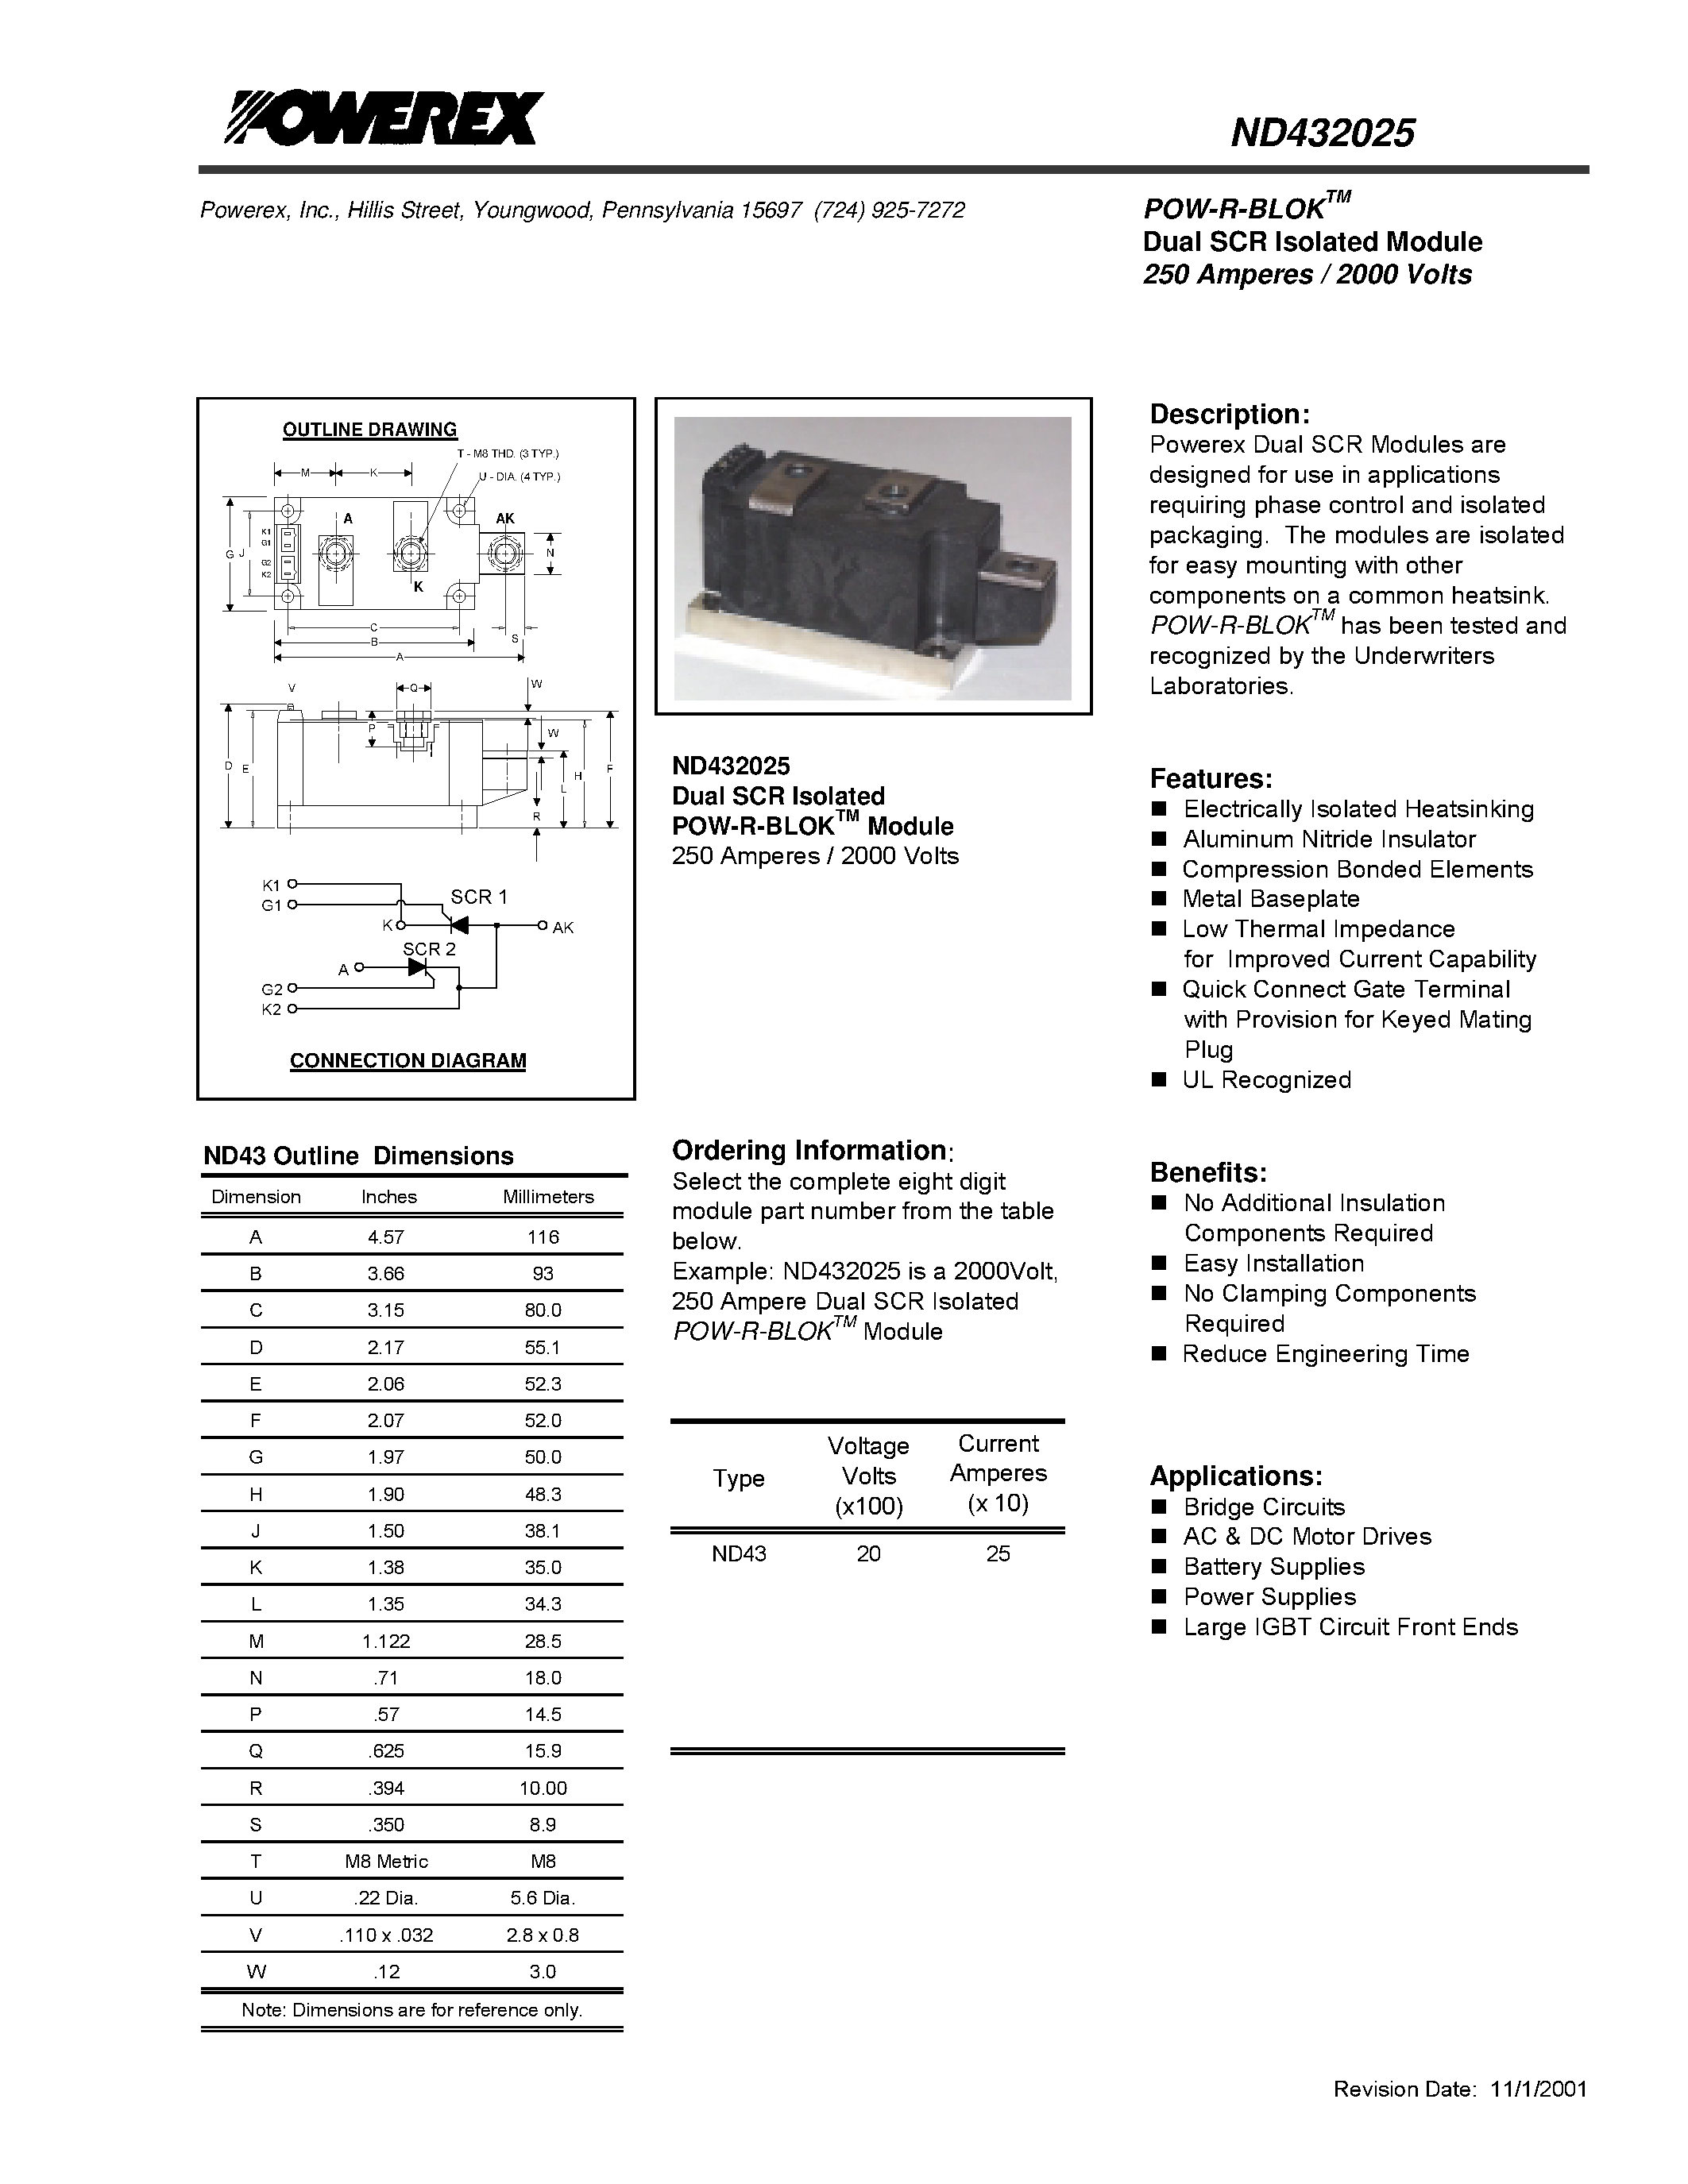 Datasheet ND432025 - POW-R-BLOK Dual SCR Isolated Module (250 Amperes / 2000 Volts) page 1